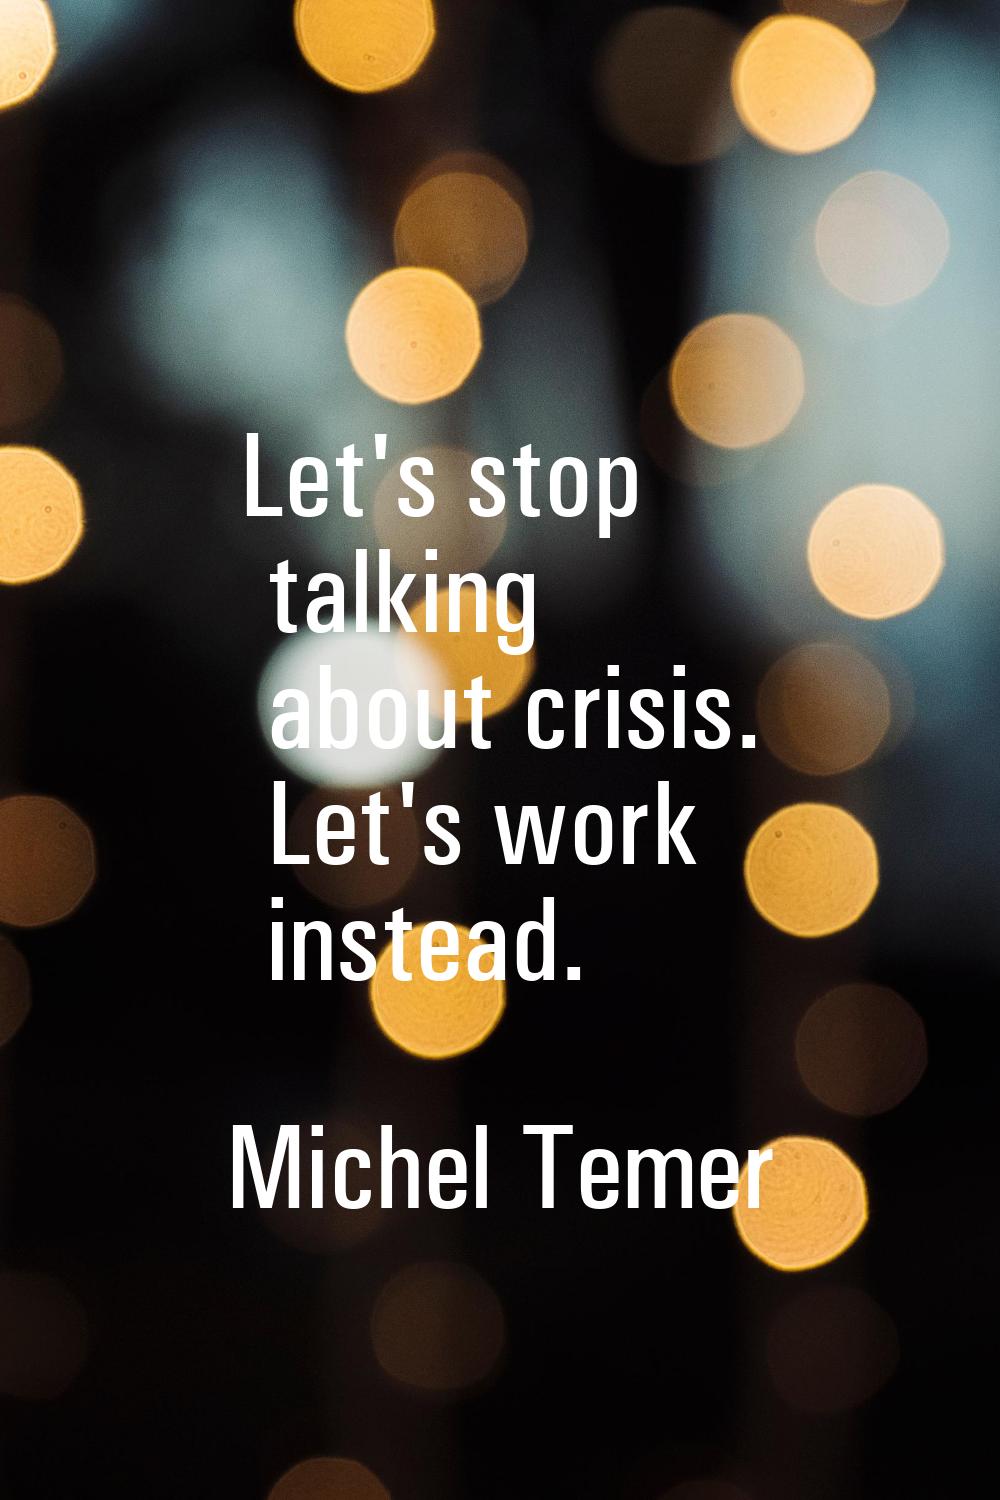 Let's stop talking about crisis. Let's work instead.